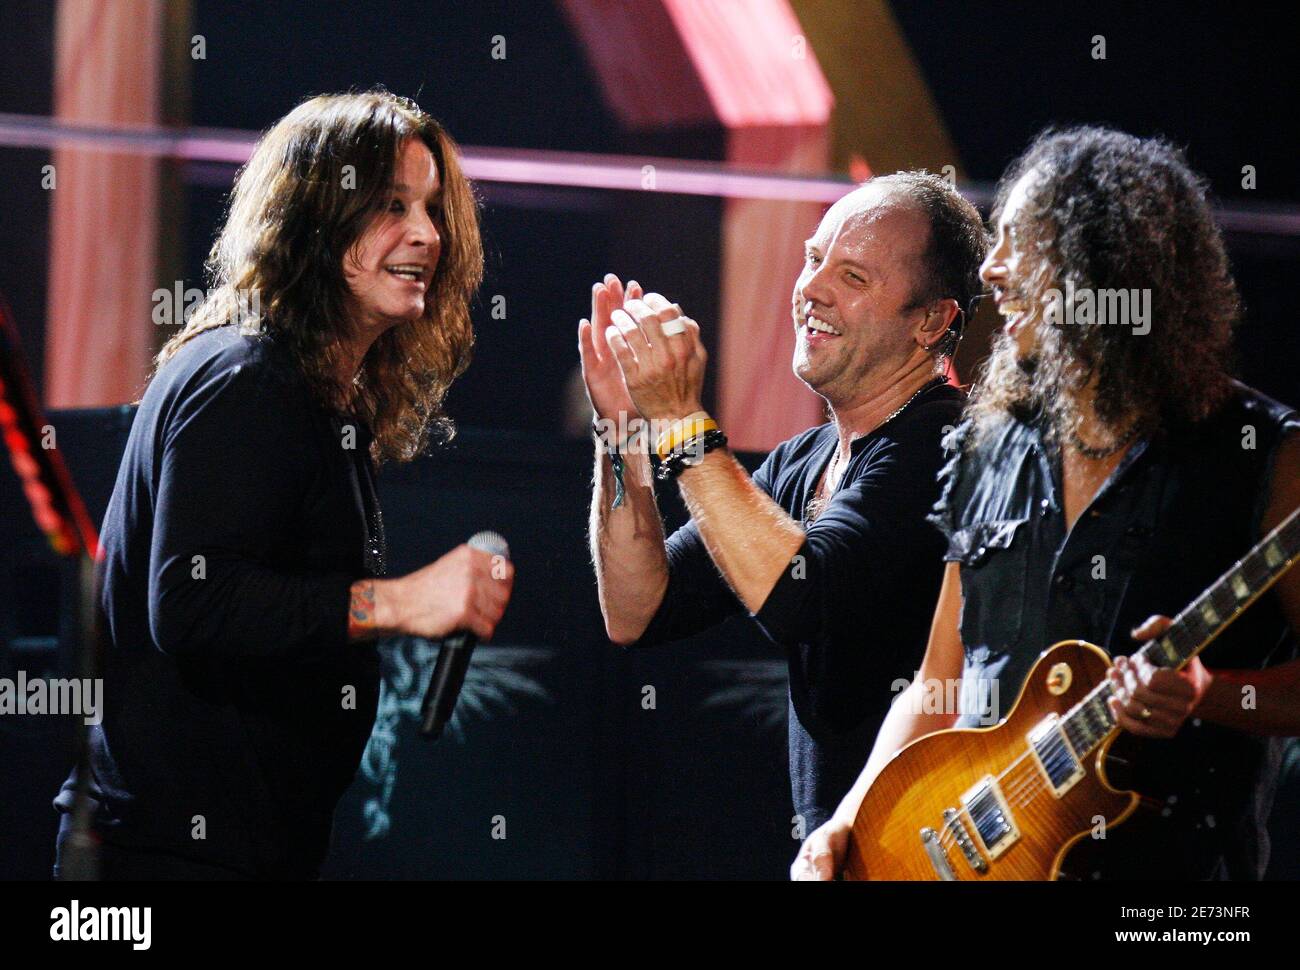 Lars Ulrich (C) and Kirk Hammett (R) of the band Metallica smile after  performing with Ozzy Osbourne (L) during the second of two 25th Anniversary  Rock & Roll Hall of Fame concerts